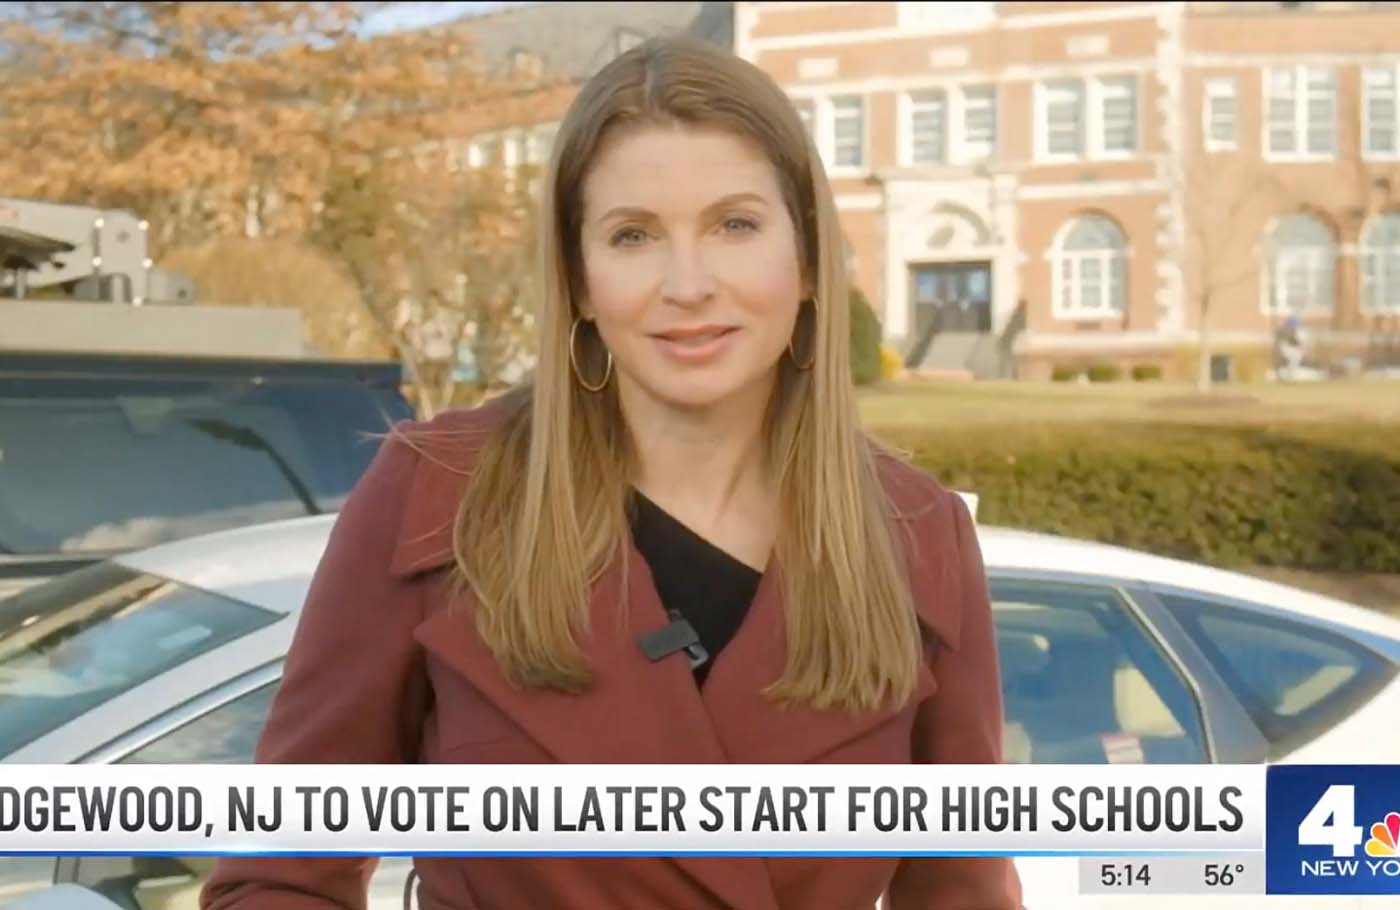 NJ School District to Vote on Later Start For High Schools